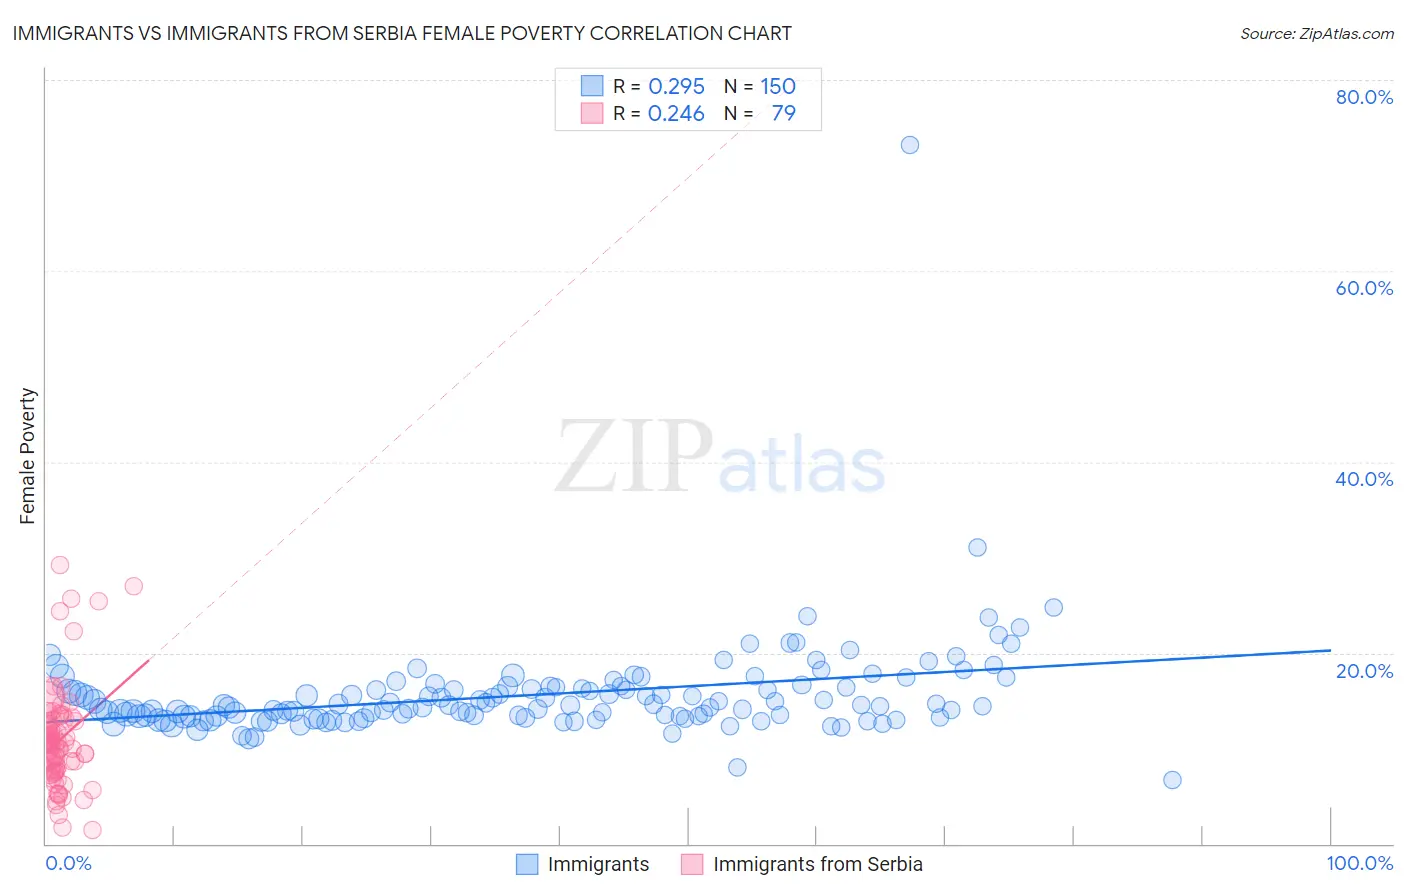 Immigrants vs Immigrants from Serbia Female Poverty